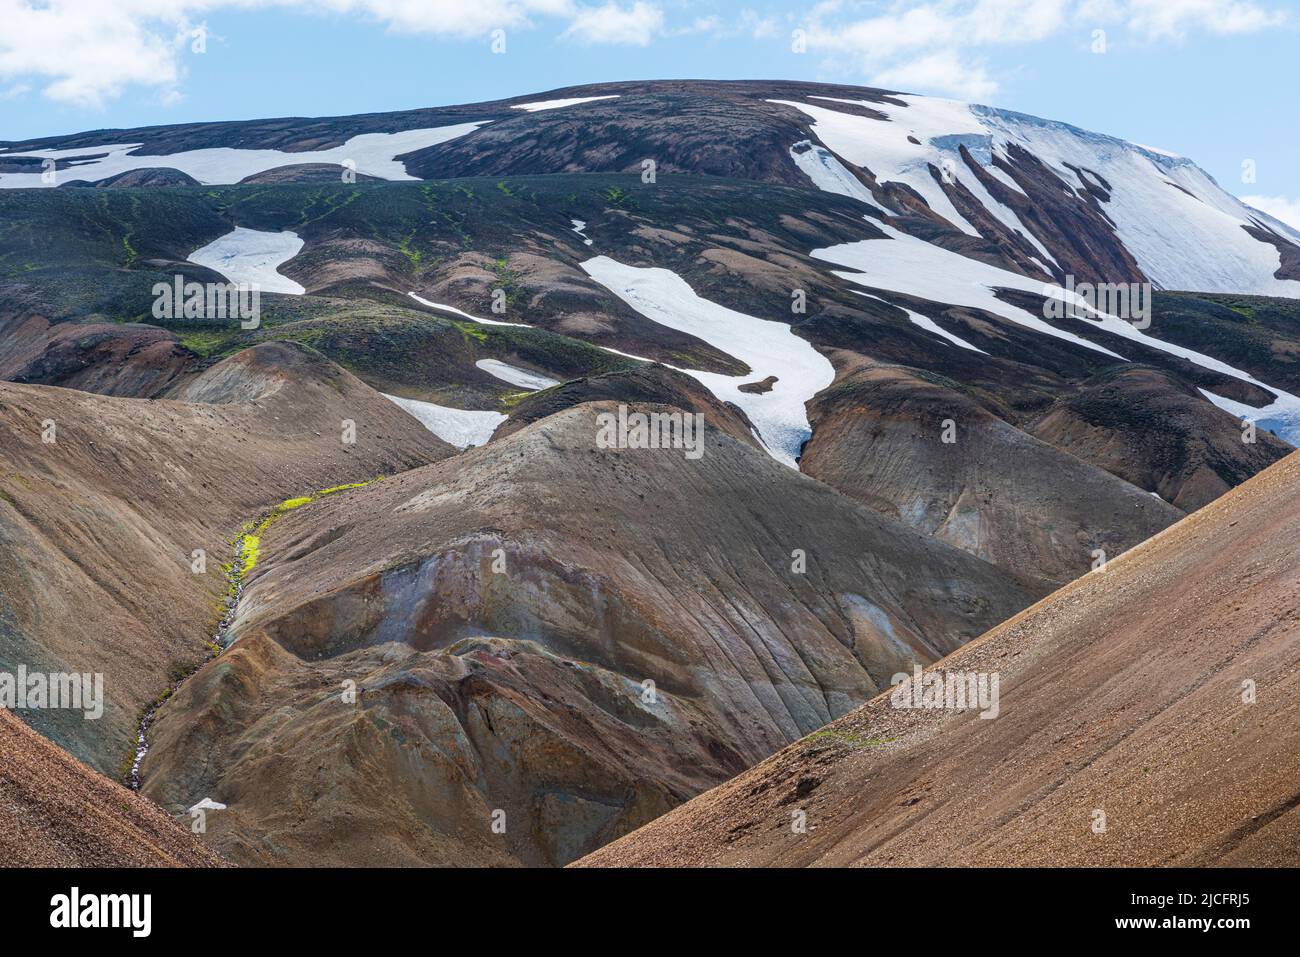 Laugavegur hiking trail is the most famous multi-day trekking tour in Iceland. Landscape shot from the area around Landmannalaugar, starting point of the long-distance hiking trail in the highlands of Iceland. Snow fields. Stock Photo